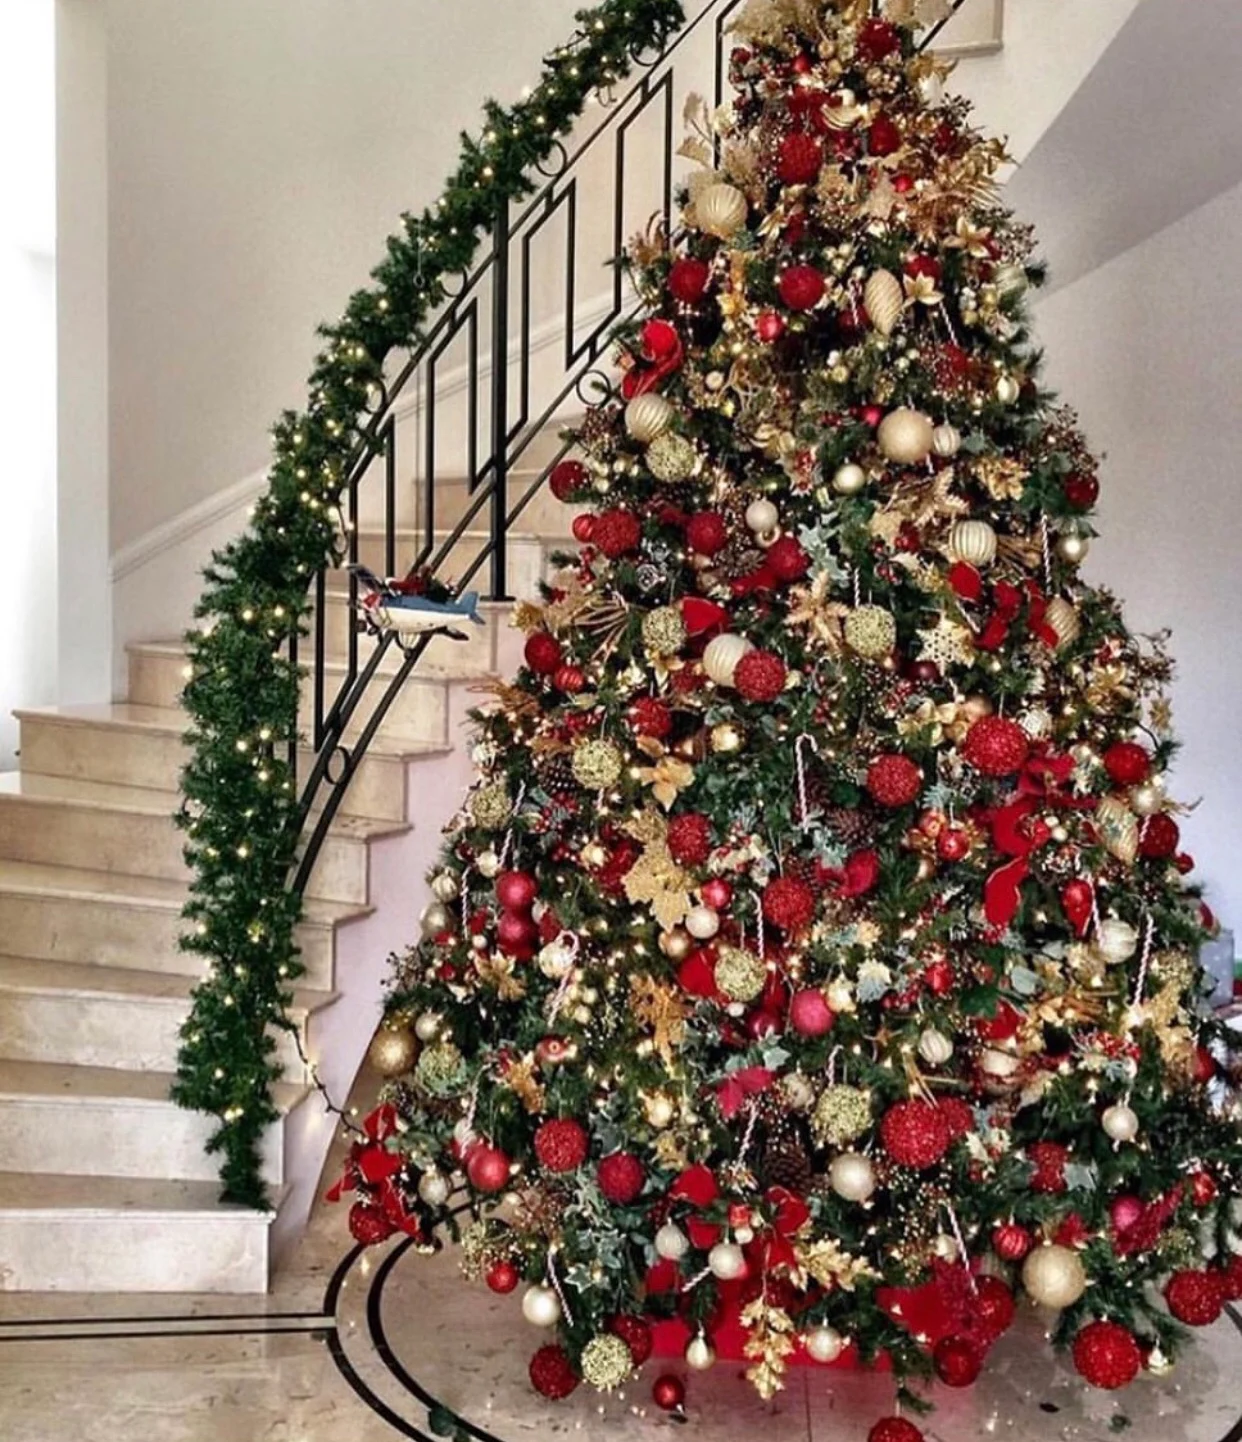 A richly decorated red and gold Christmas tree